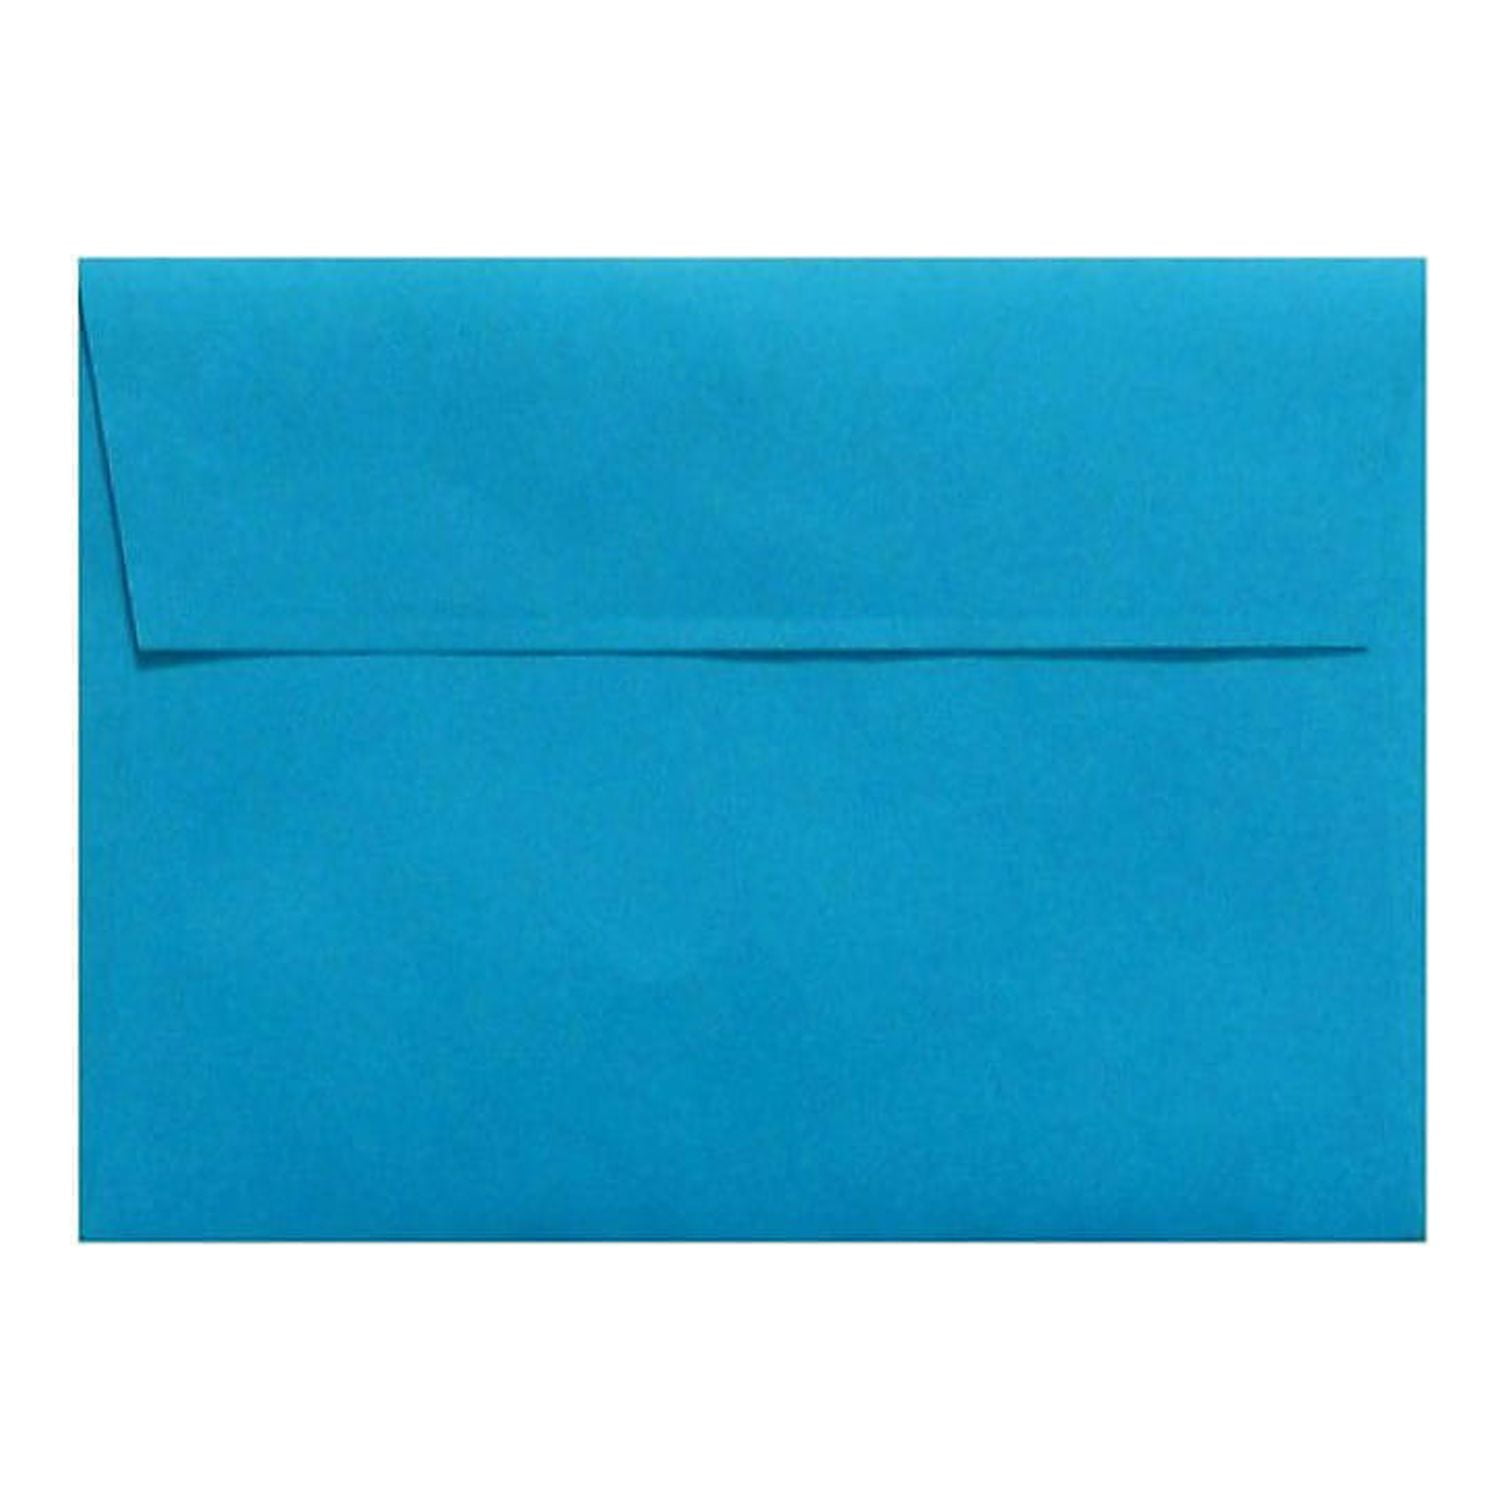 Invitation Envelopes, 140-Pack 4x6 Envelopes for Invitations, Colored  Envelopes, A4, 4 1/4 x 6 1/4 Inches, 7 Colors